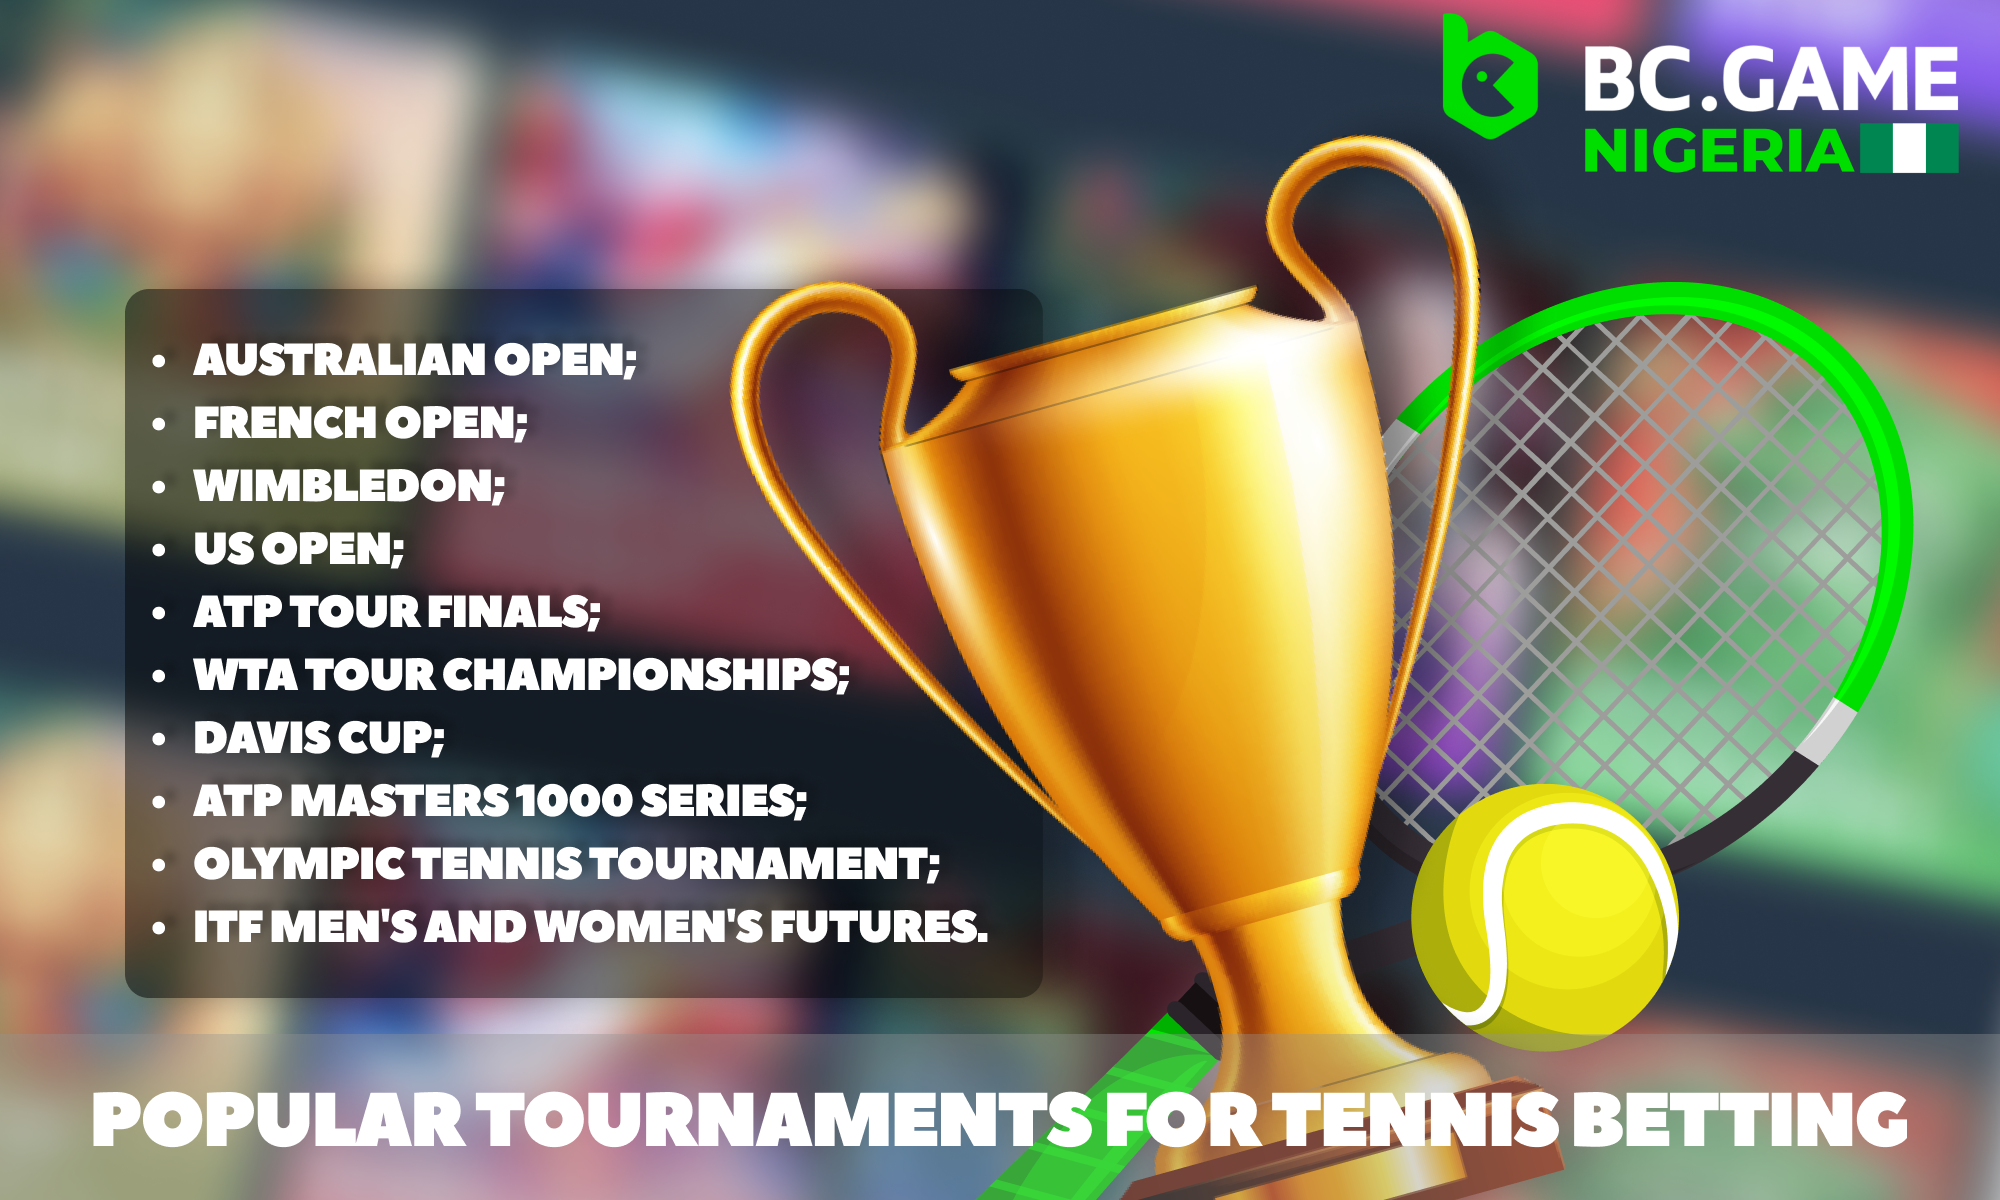 Tennis events for betting at the BC Game in Nigeria